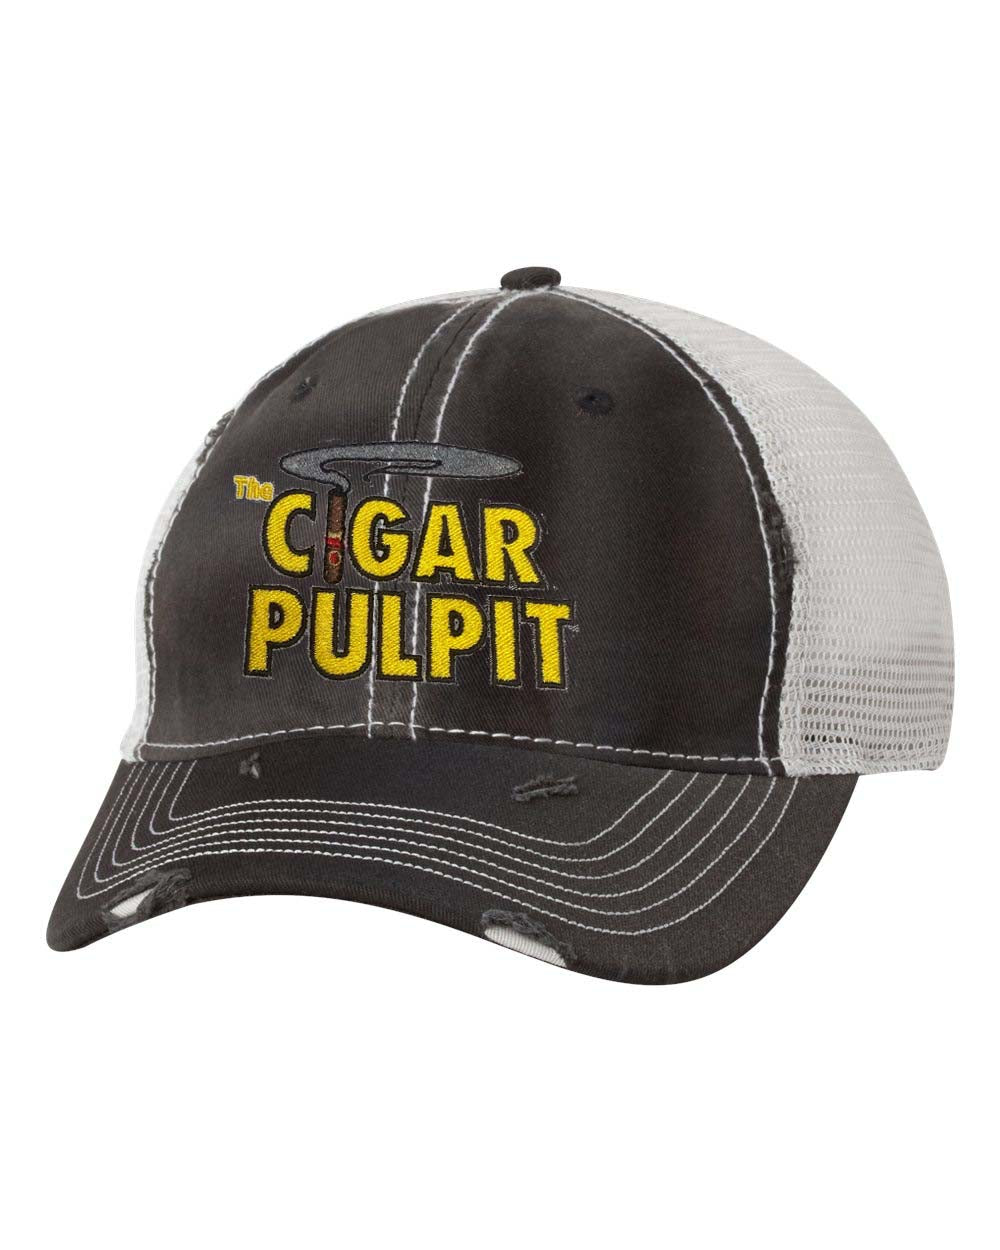 Cigar Pulpit - Black/Silver Dirty Washed Trucker Hat